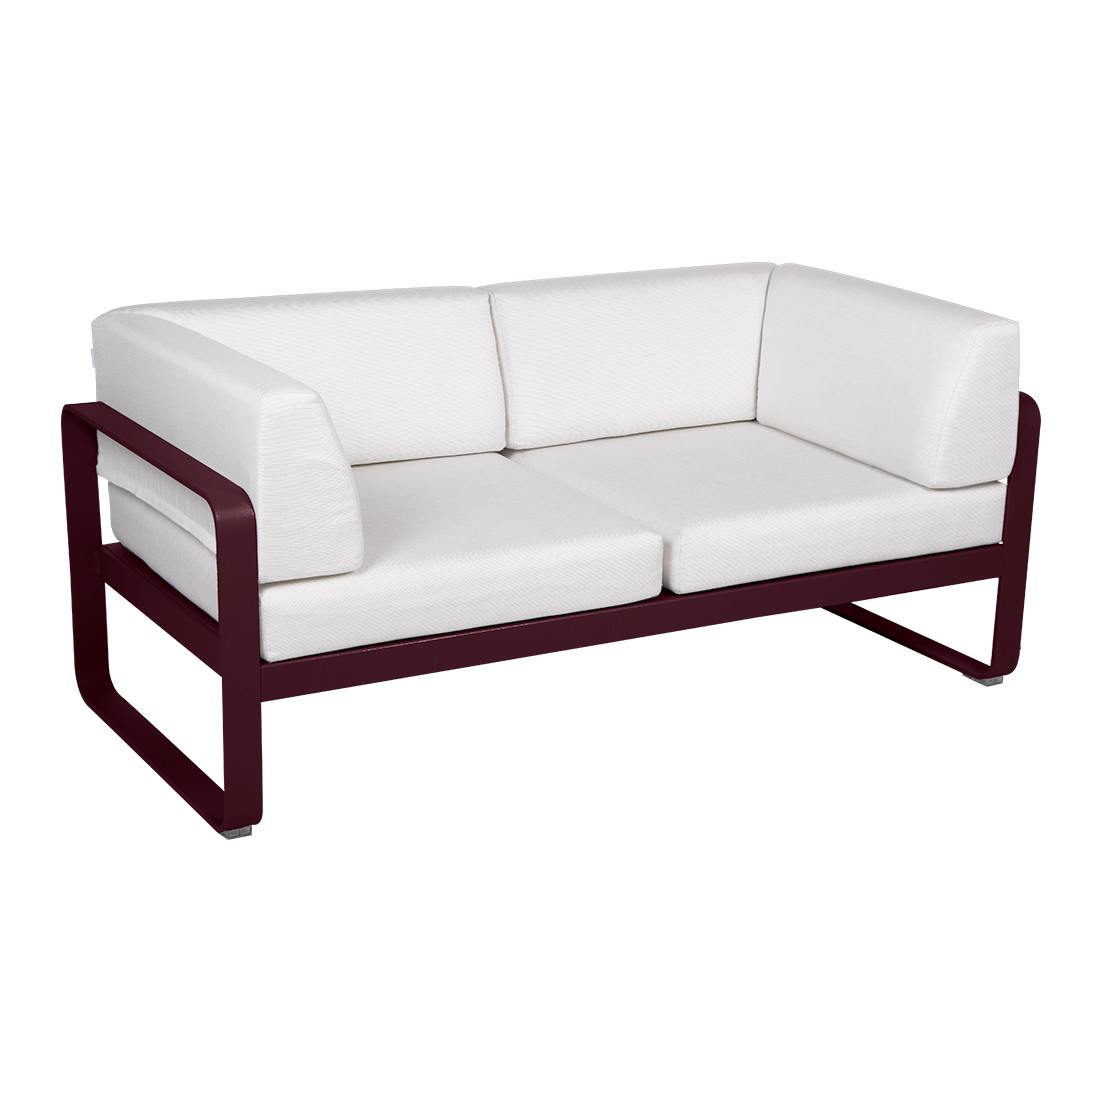 BELLEVIE garden sofa - 2-seater with side cushions